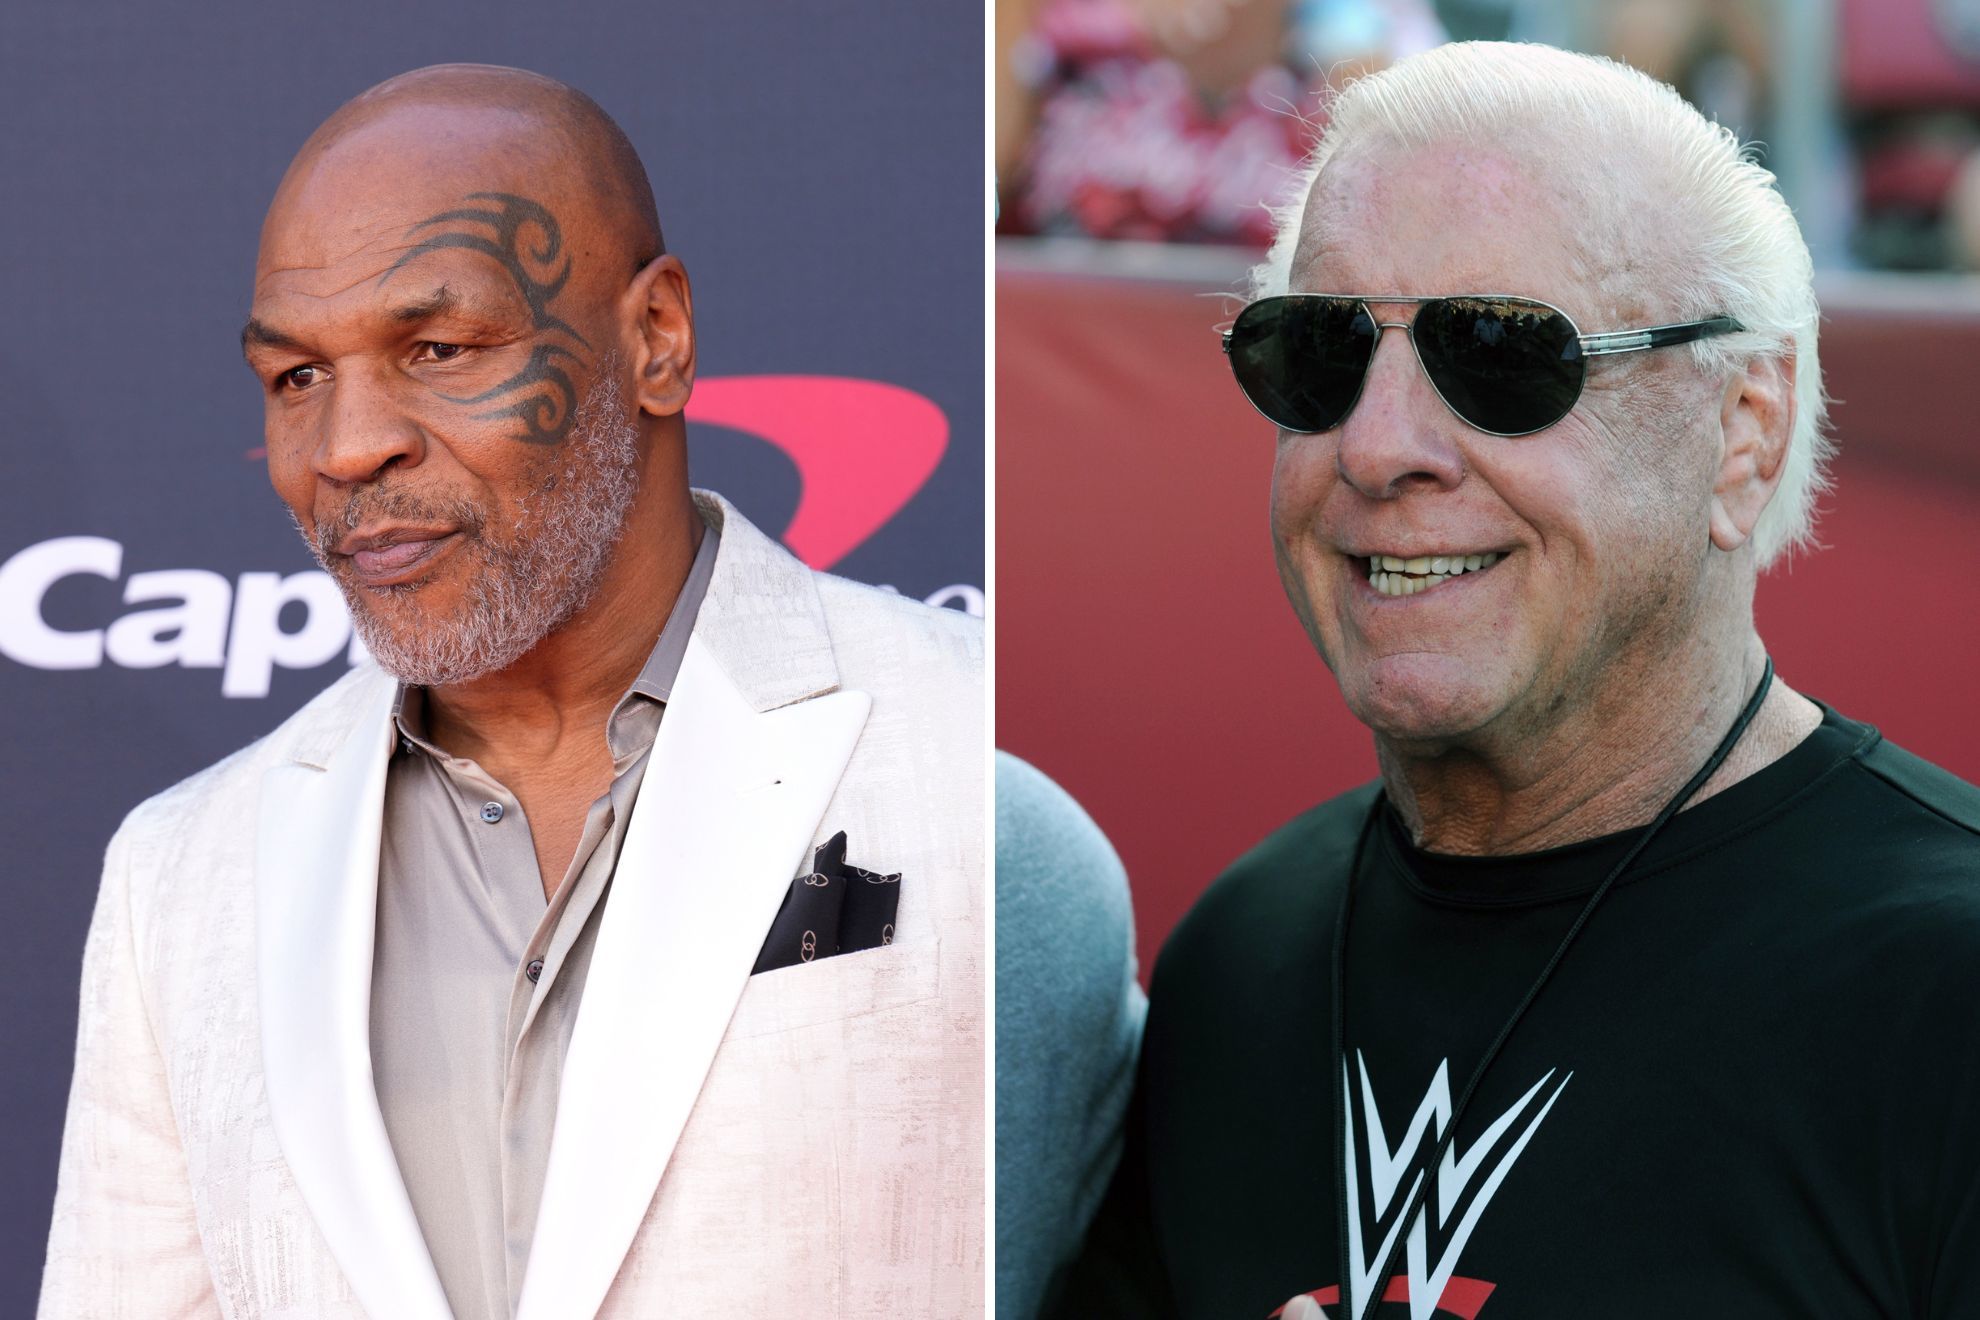 Ric Flair shares funny story about smoking cannabis with Mike Tyson; who can smoke the most?